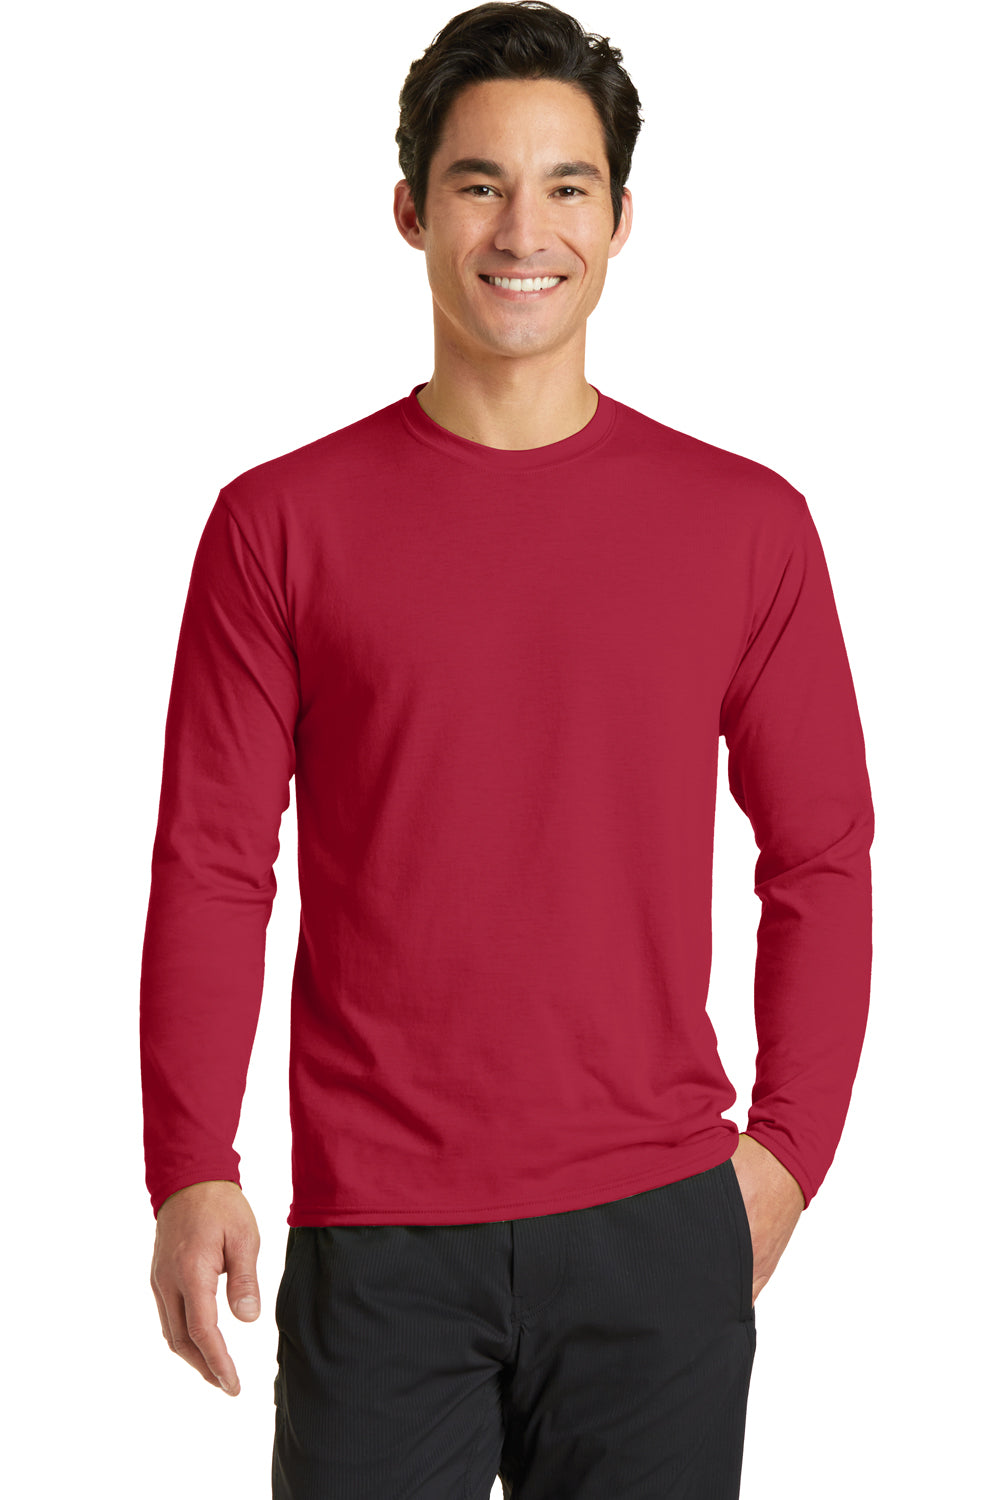 Port & Company PC381LS Mens Dry Zone Performance Moisture Wicking Long Sleeve Crewneck T-Shirt Red Front